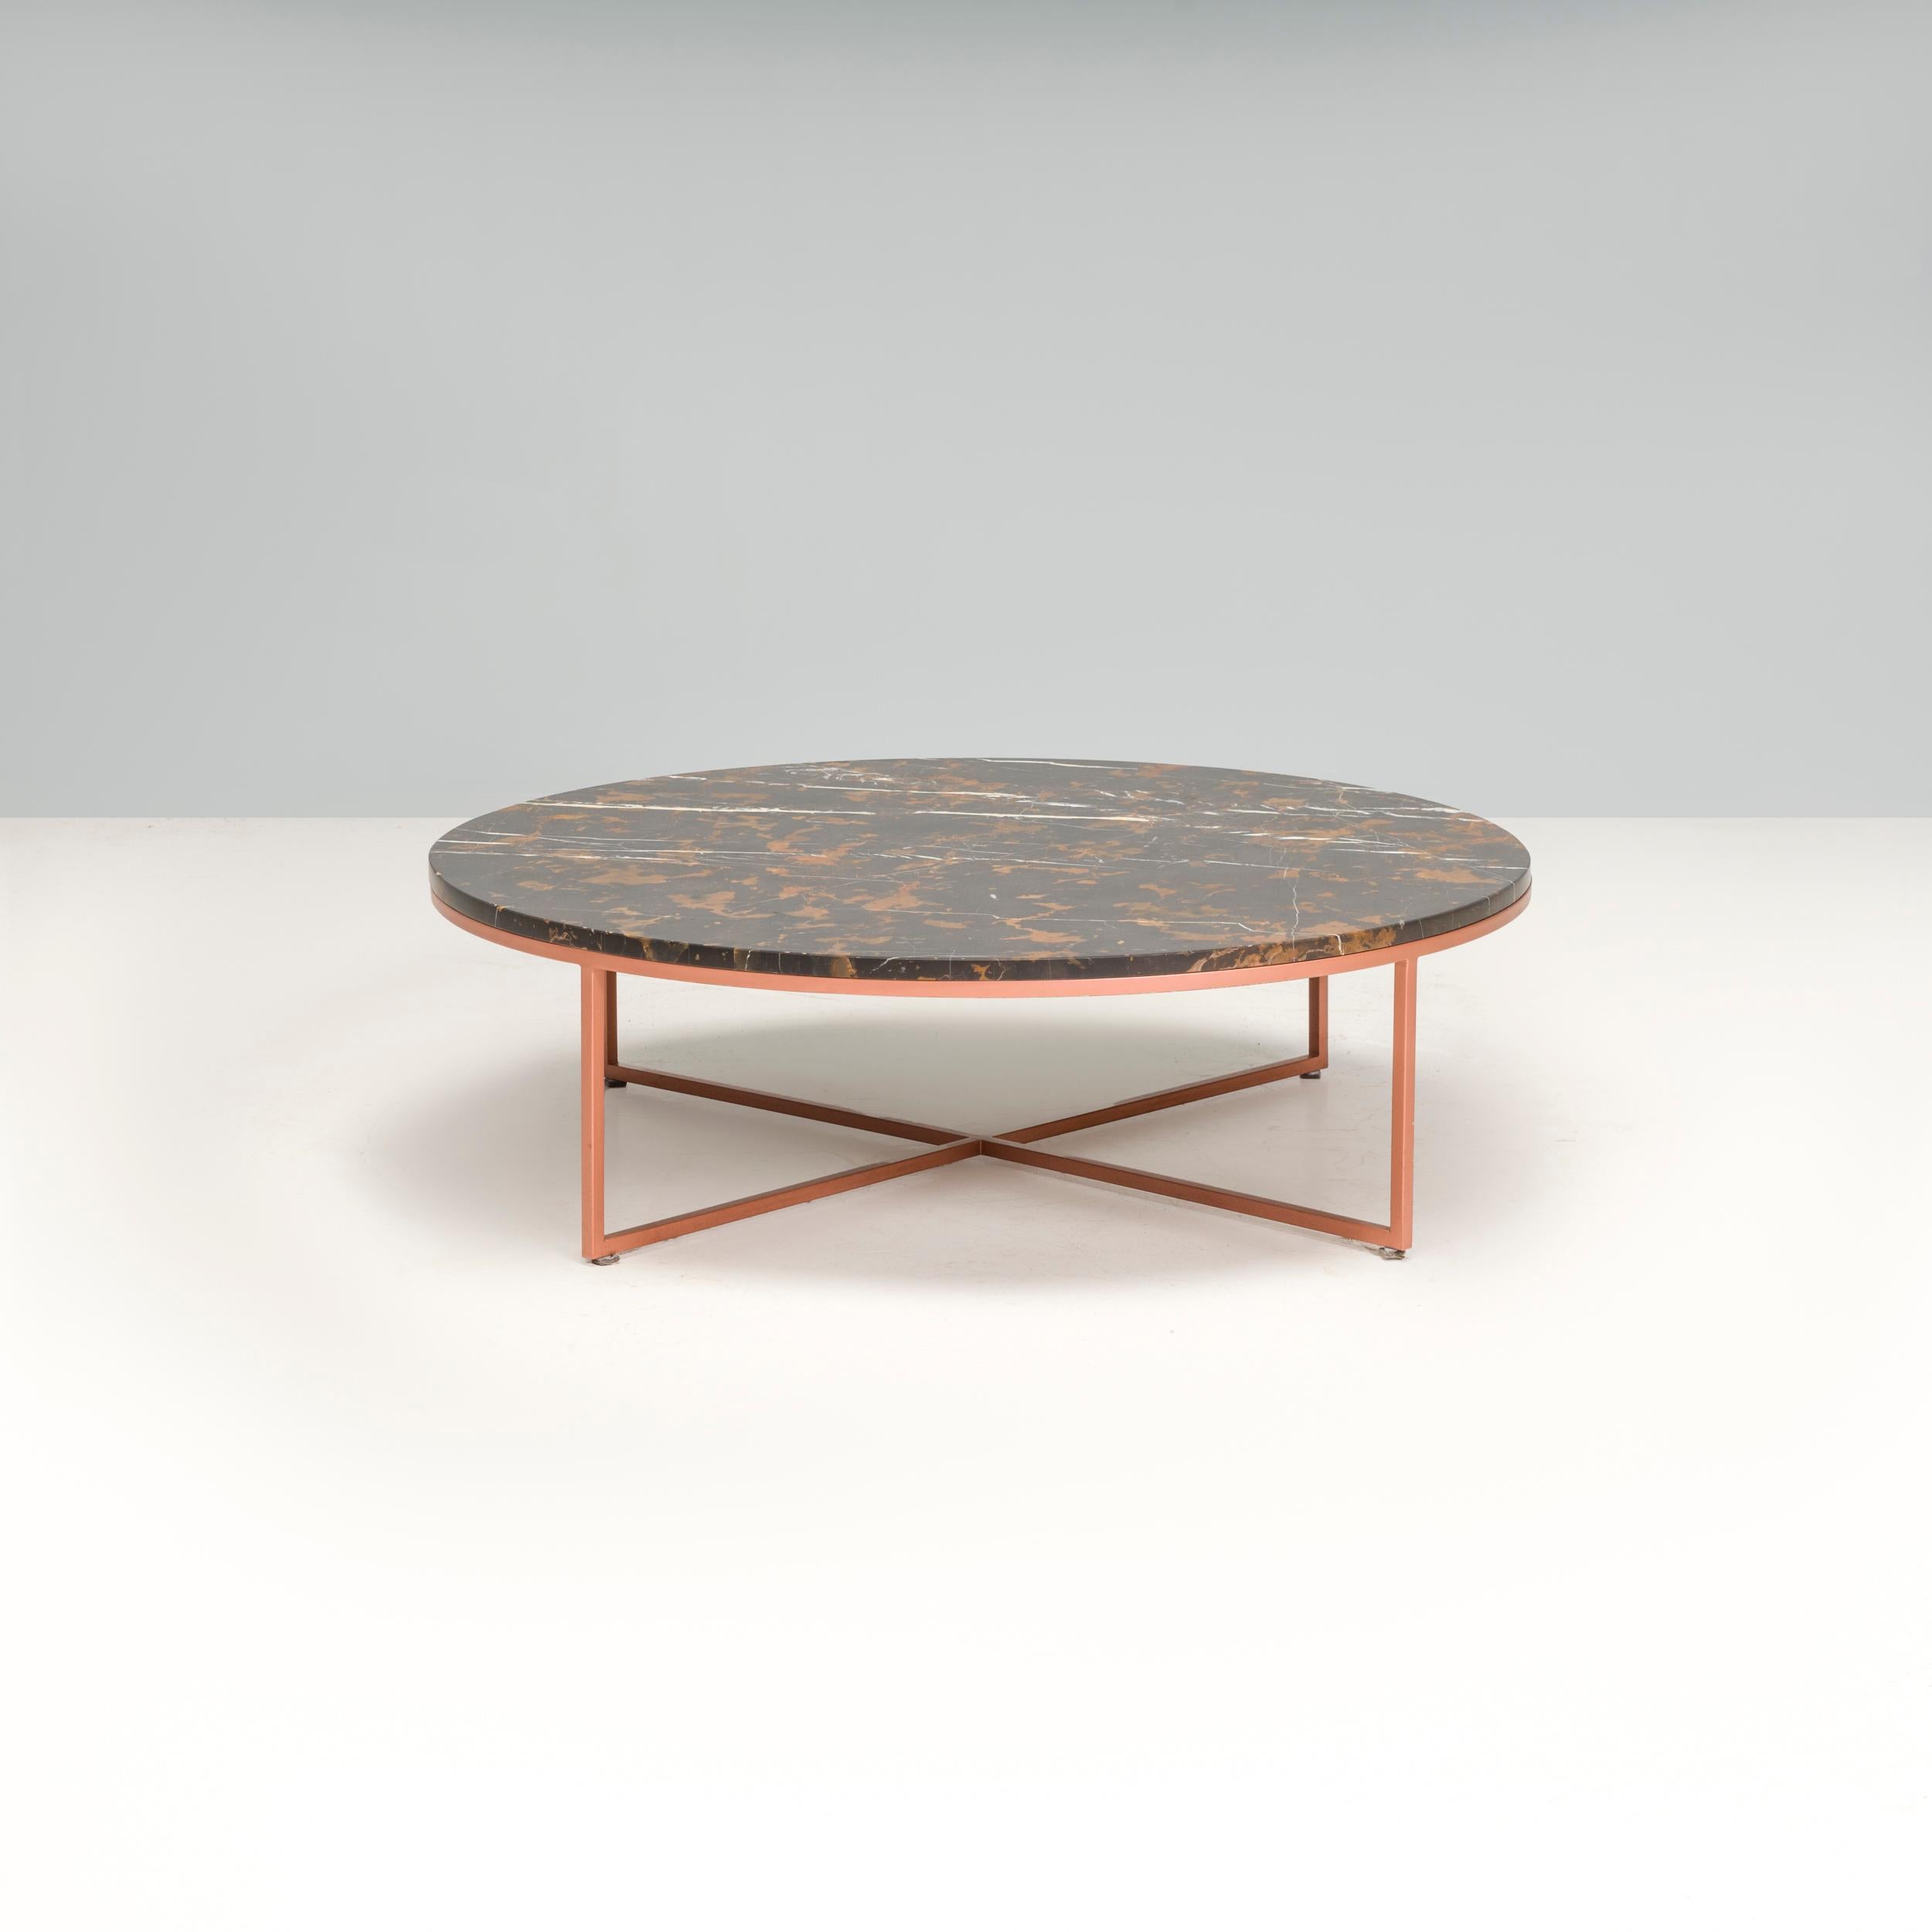 Designed and manufactured by Amode, this Porto coffee is a luxurious piece of contemporary design. Featuring a stunning gold black marble tabletop, the circular coffee table allows the material to take centre stage.

Sitting on a slimline metal base